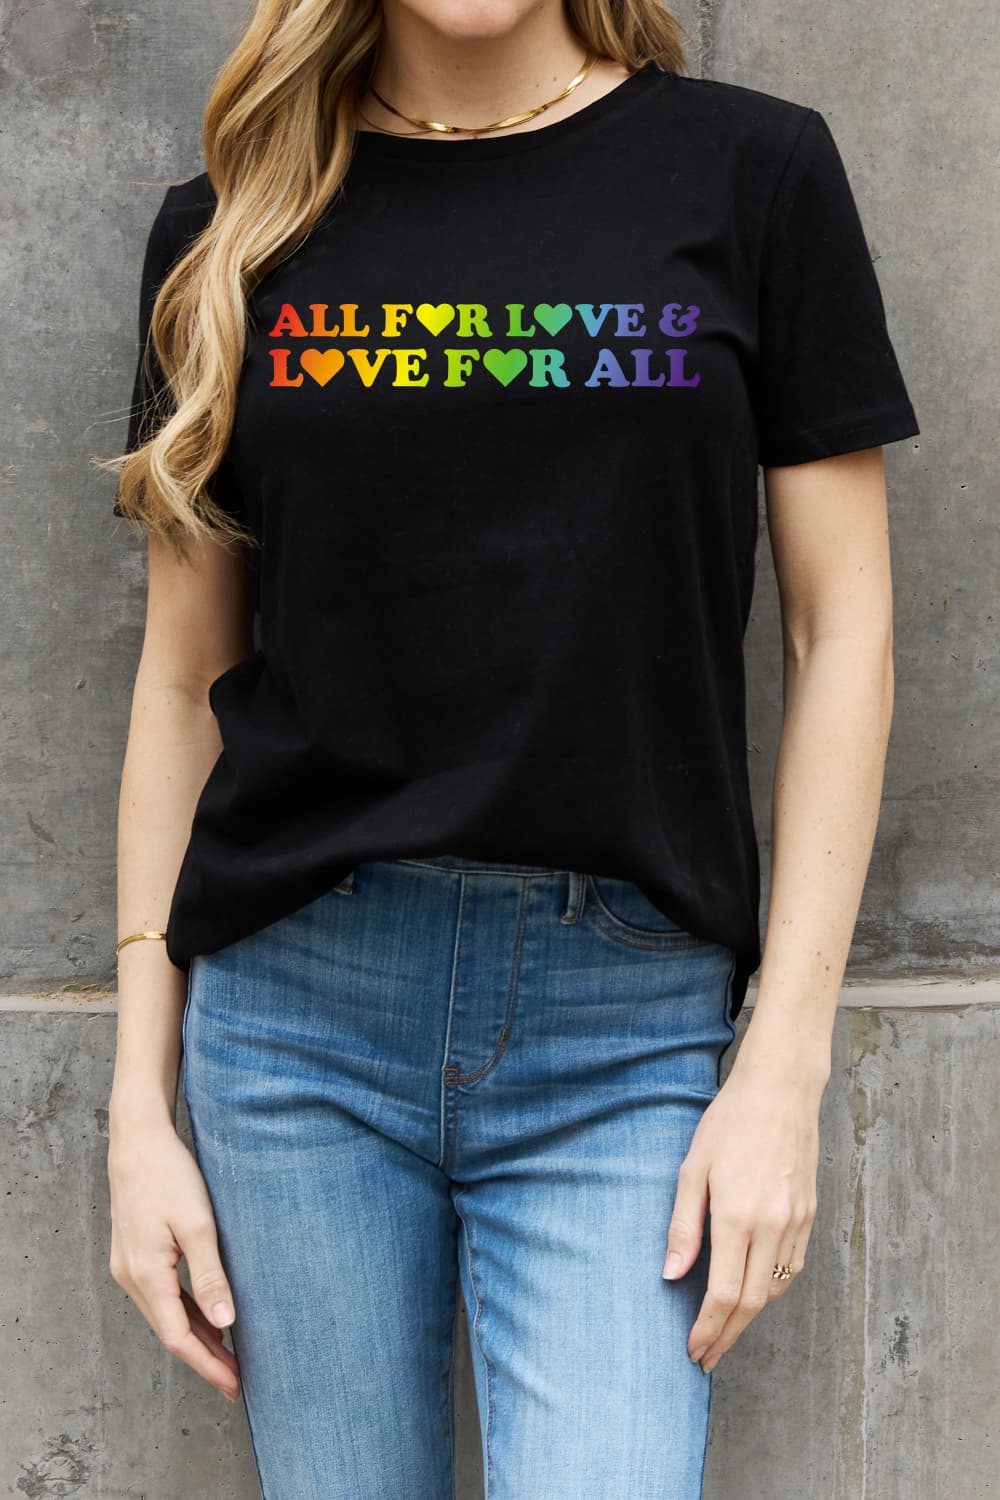 Simply Love ALL FOR LOVE & LOVE FOR ALL Graphic Cotton Tee